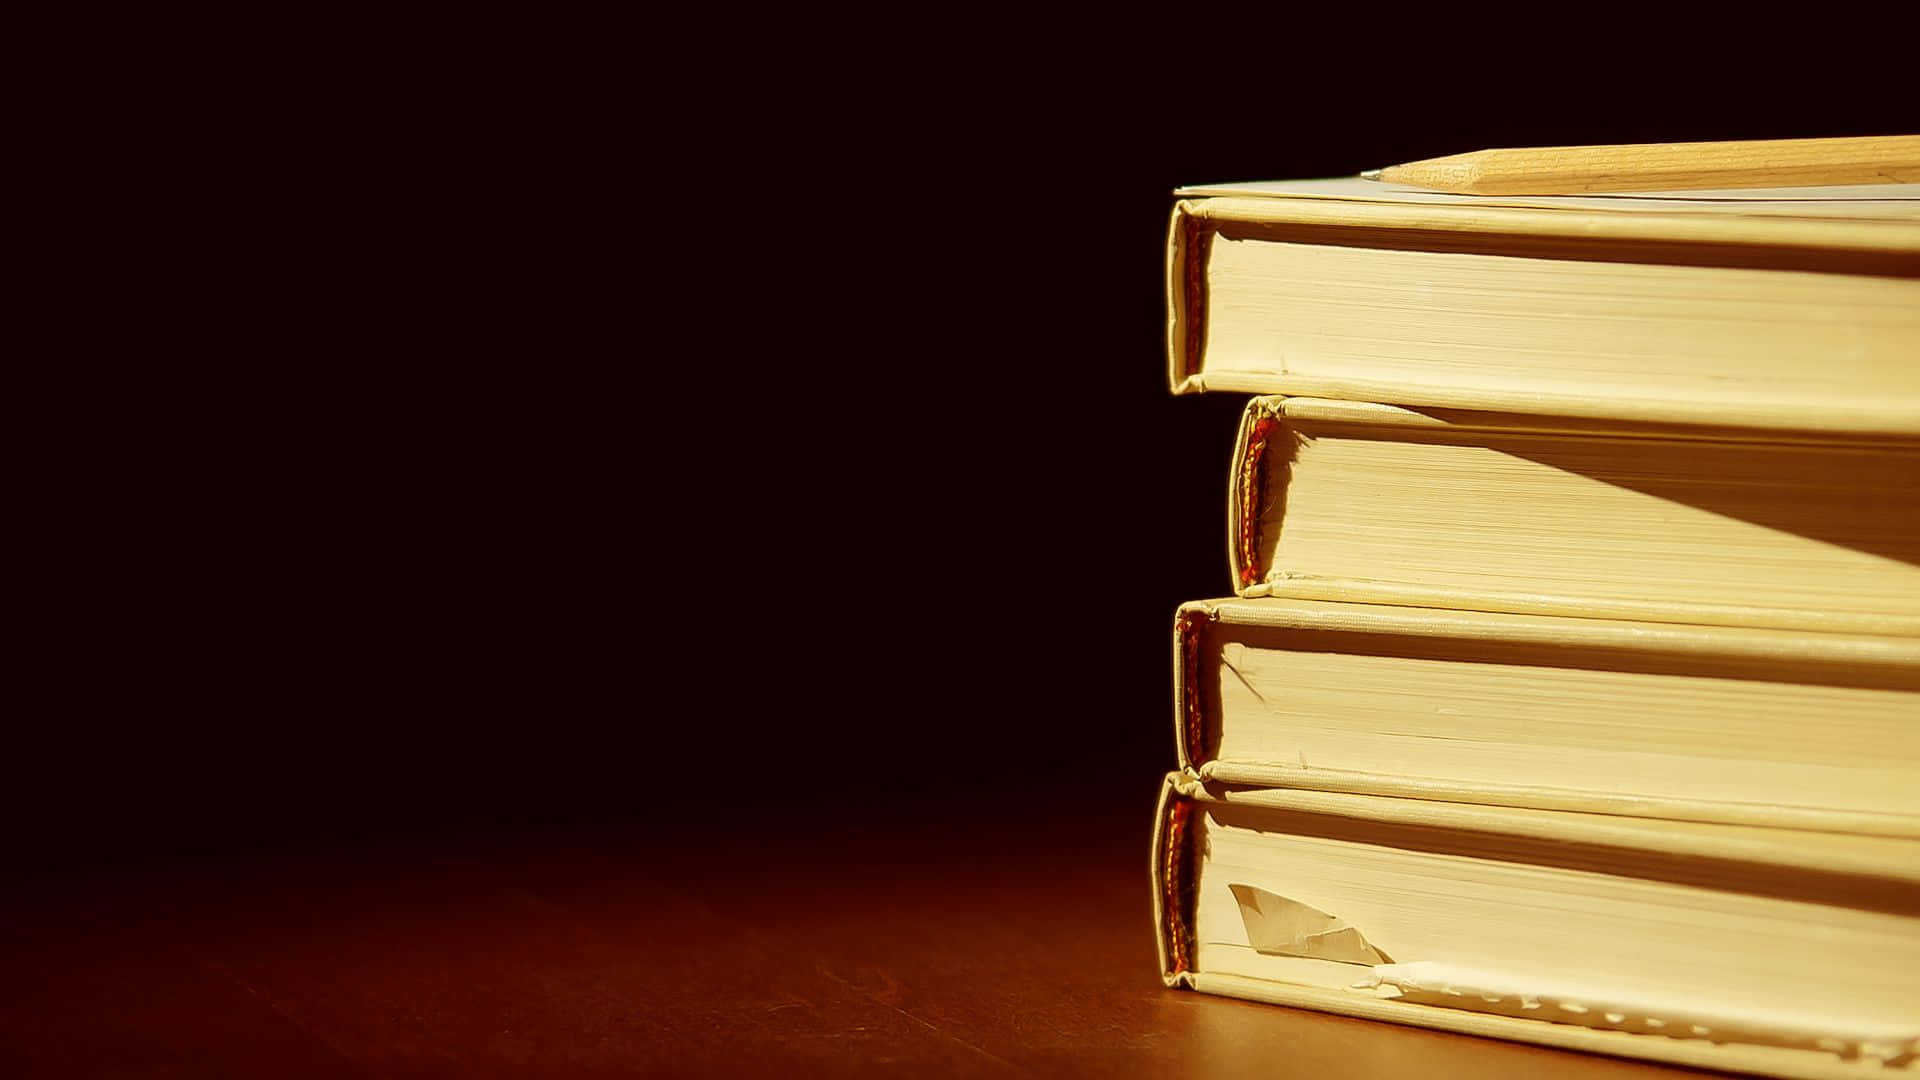 A Stack Of Books On A Table With A Light Behind Them